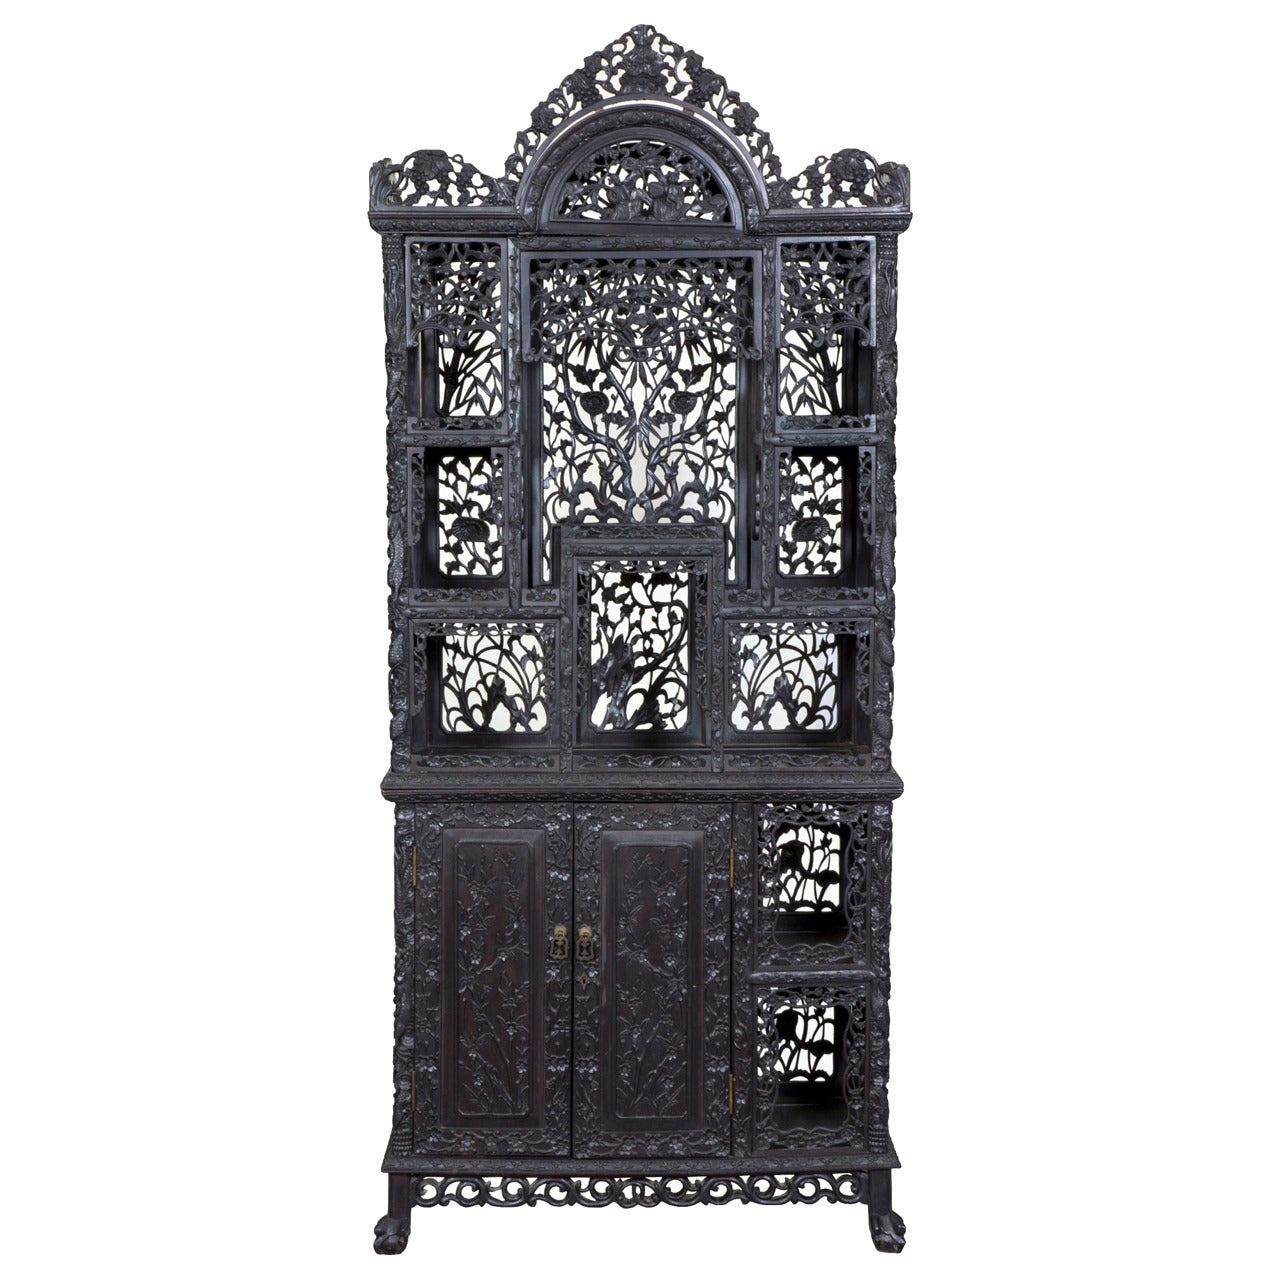 Display Cabinet or Etagere, China, Late 19th-Early 20th Century